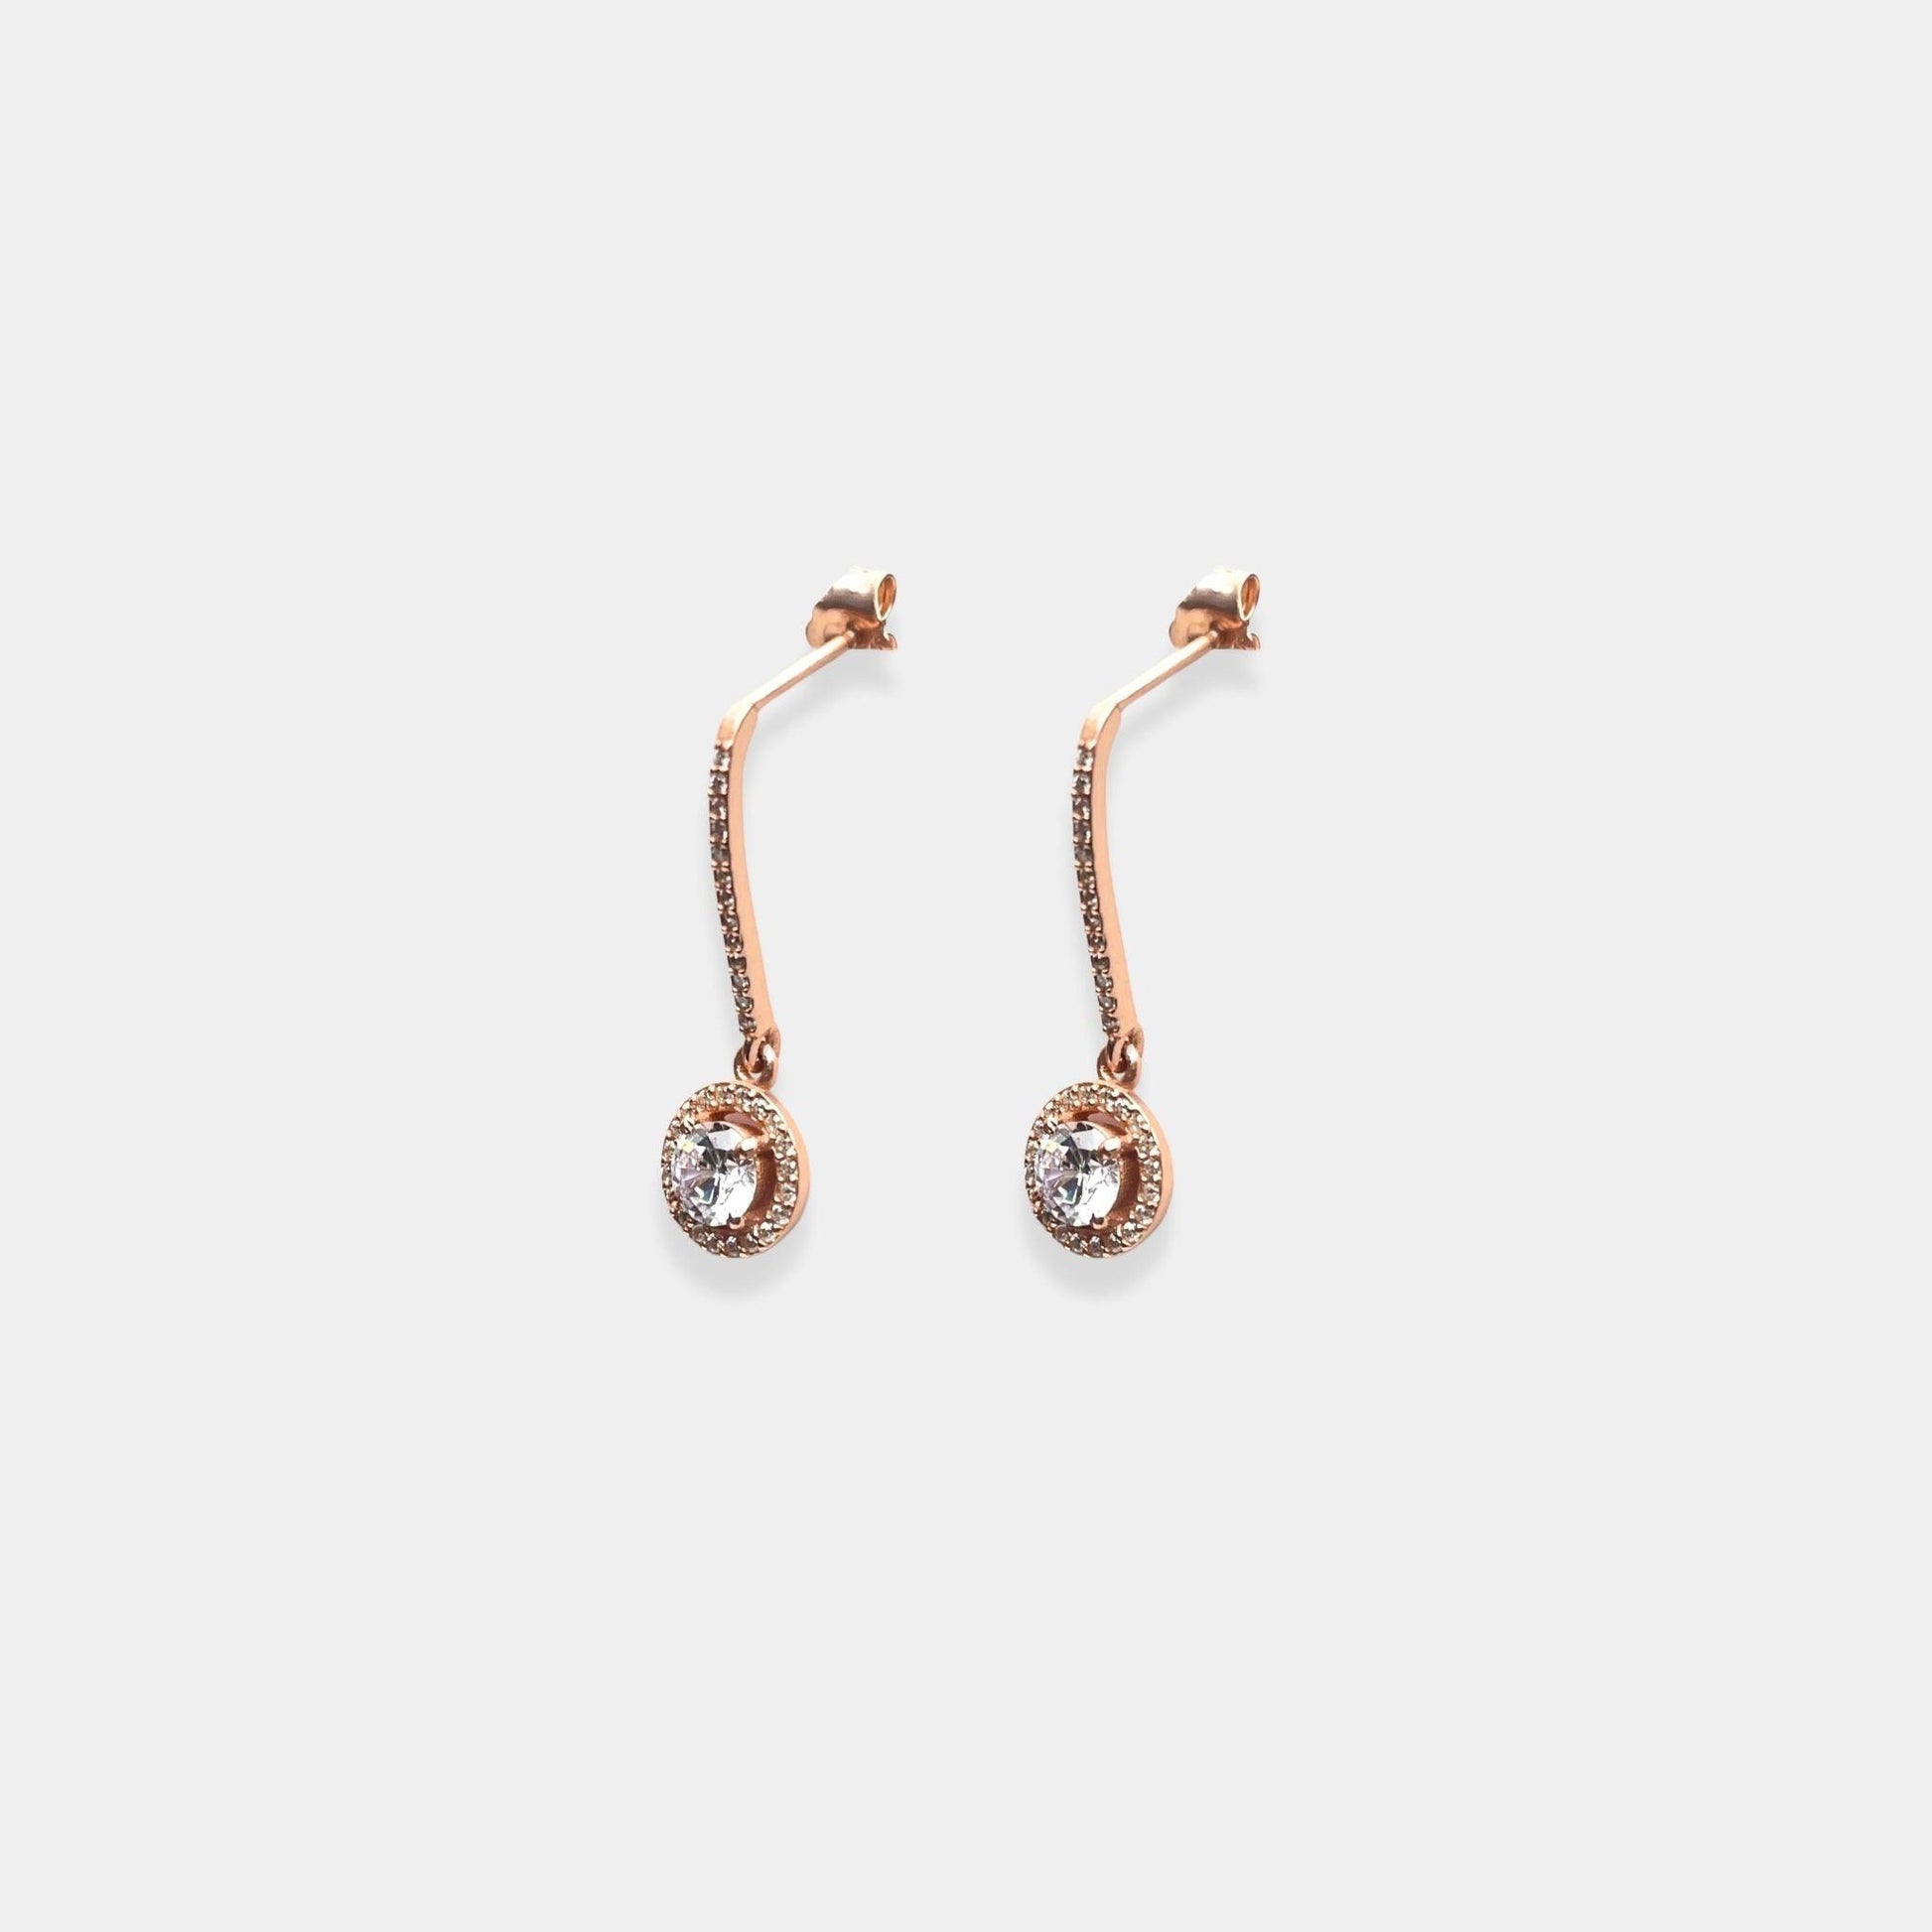 Rose gold earrings, crafted from sterling silver